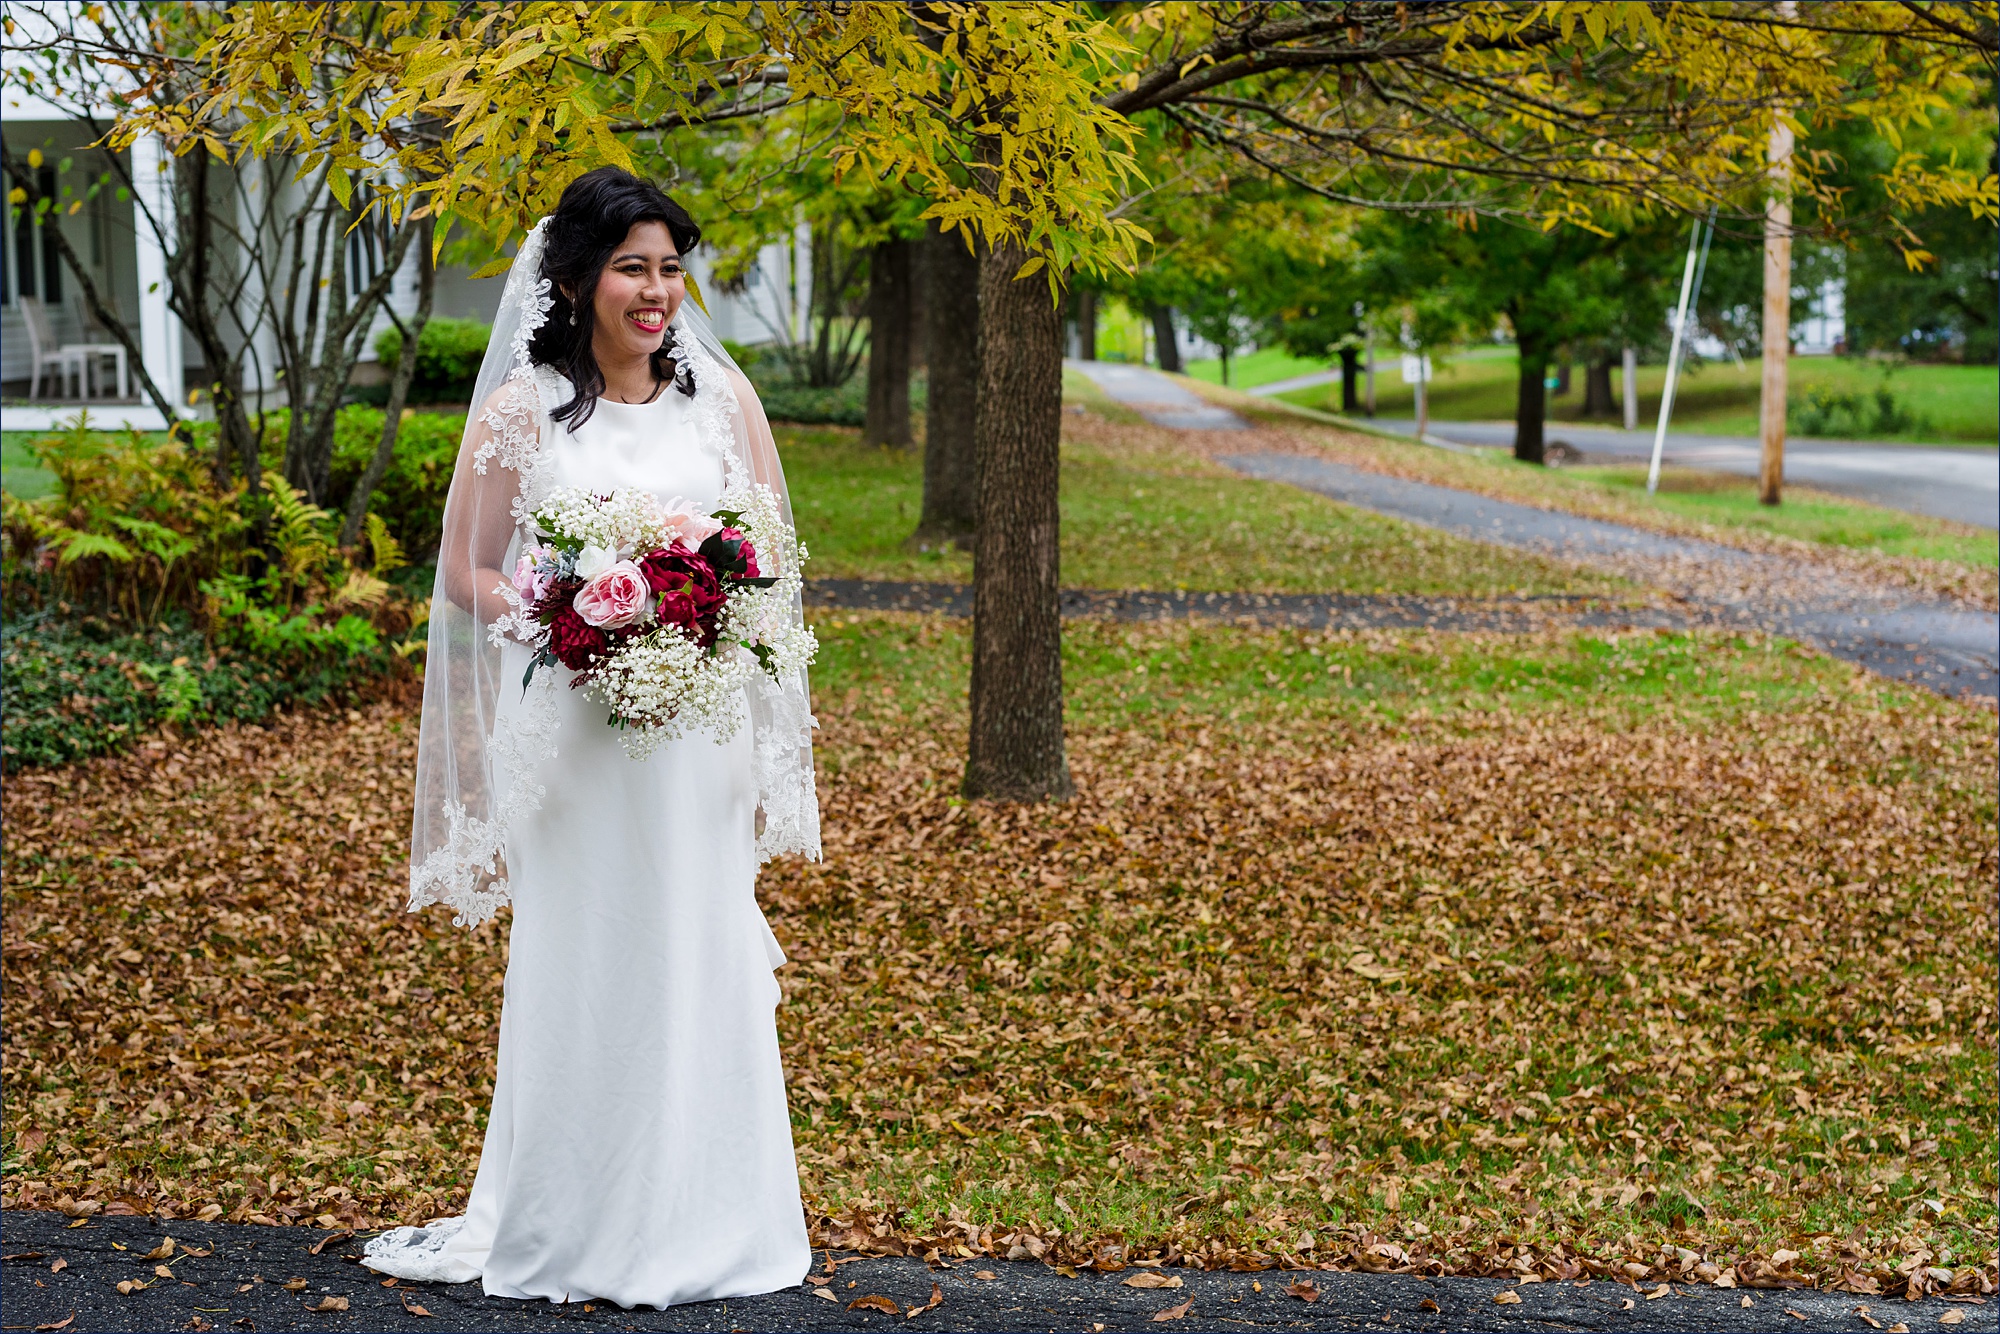 The bride stands in the fall leaves before heading to her Dartmouth Wedding ceremony